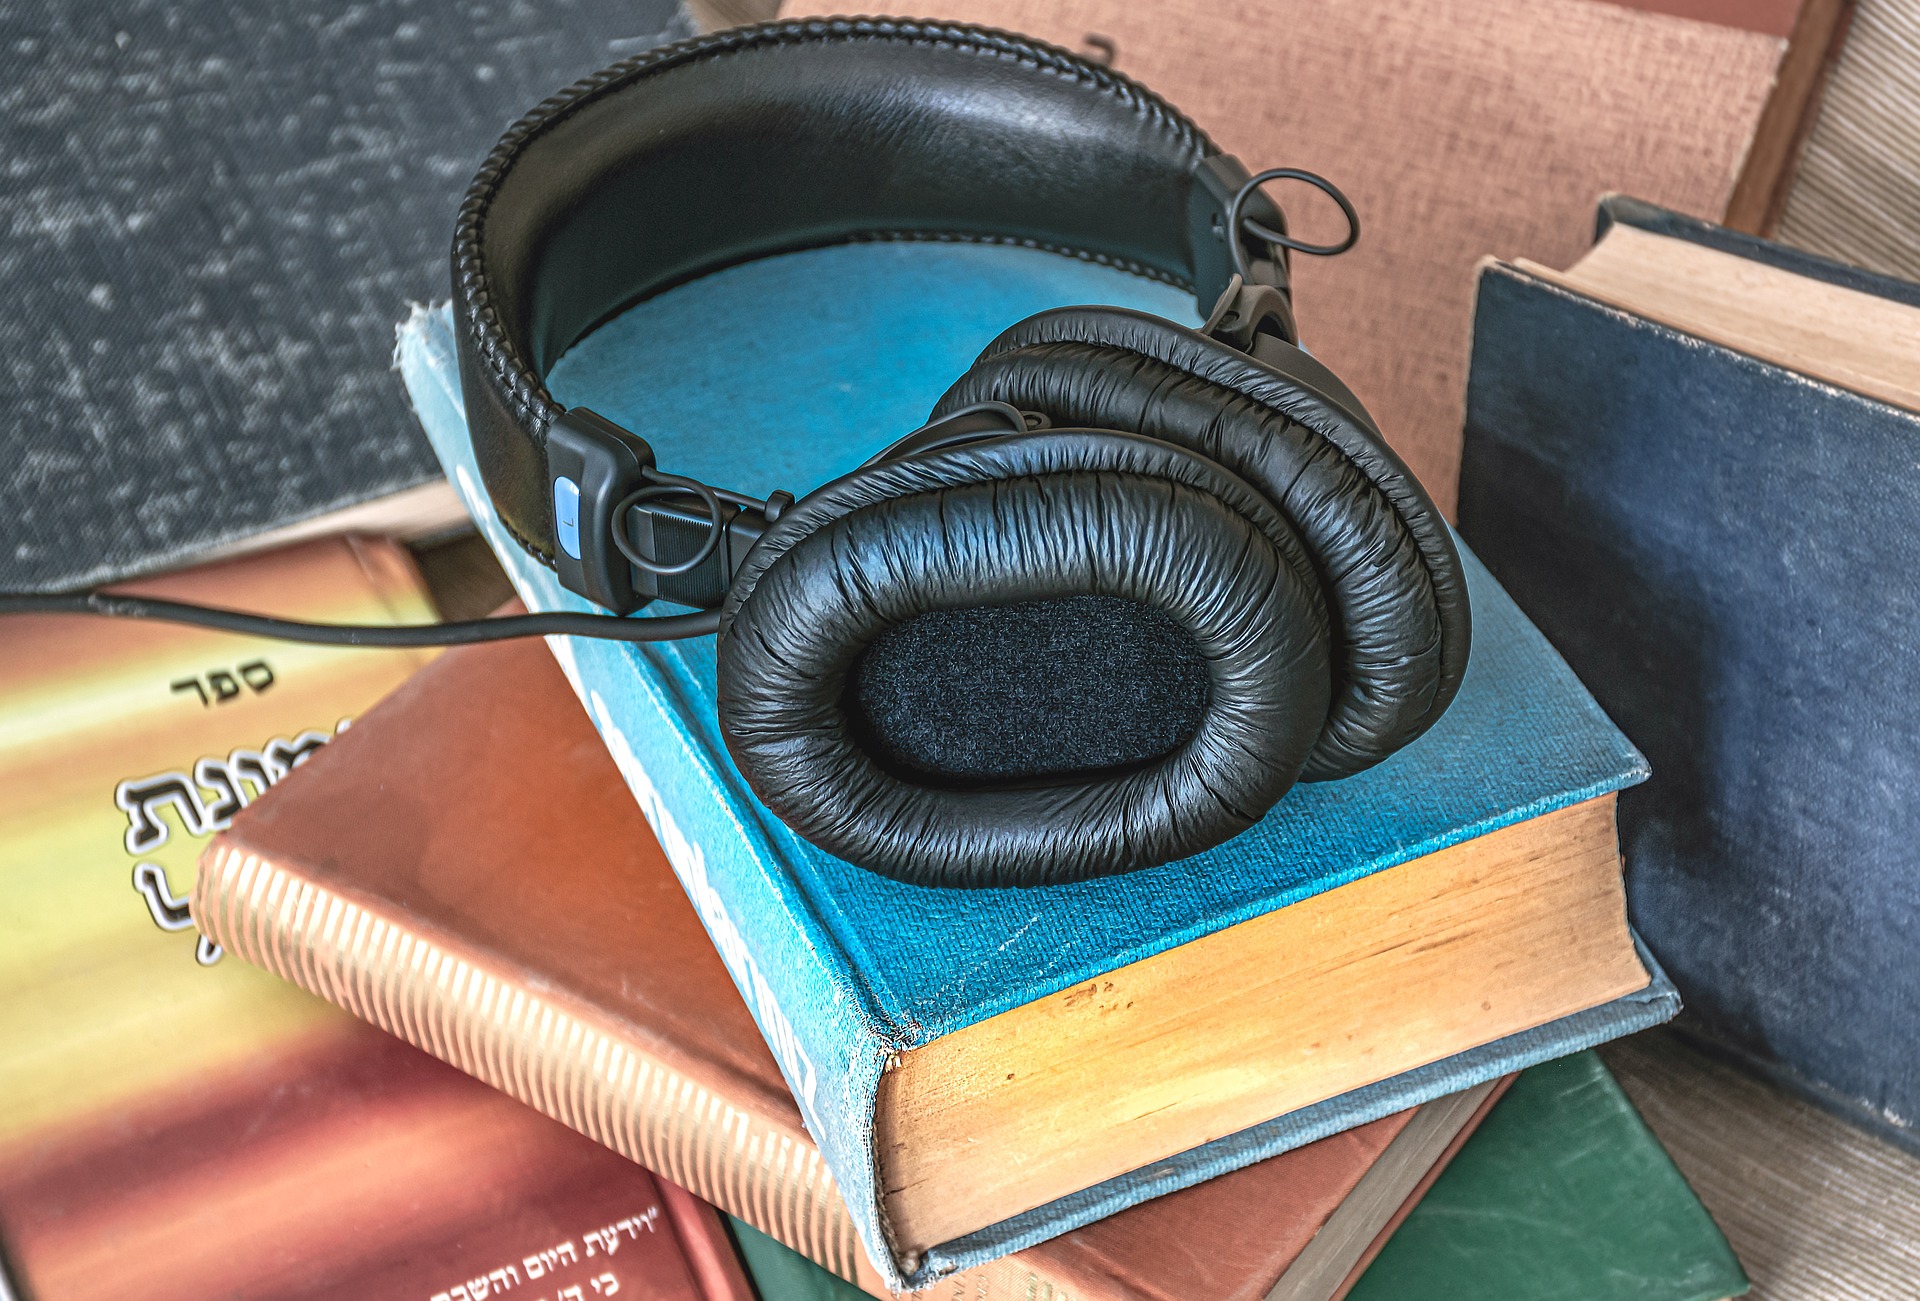 Books and headphones representing the Audiobook Narration article.